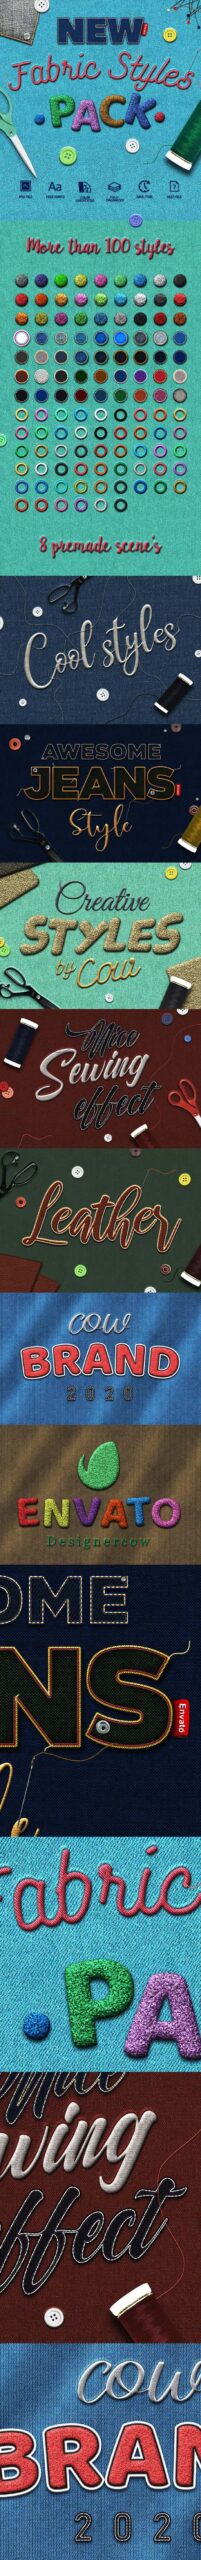 Fabric Text Effects V2